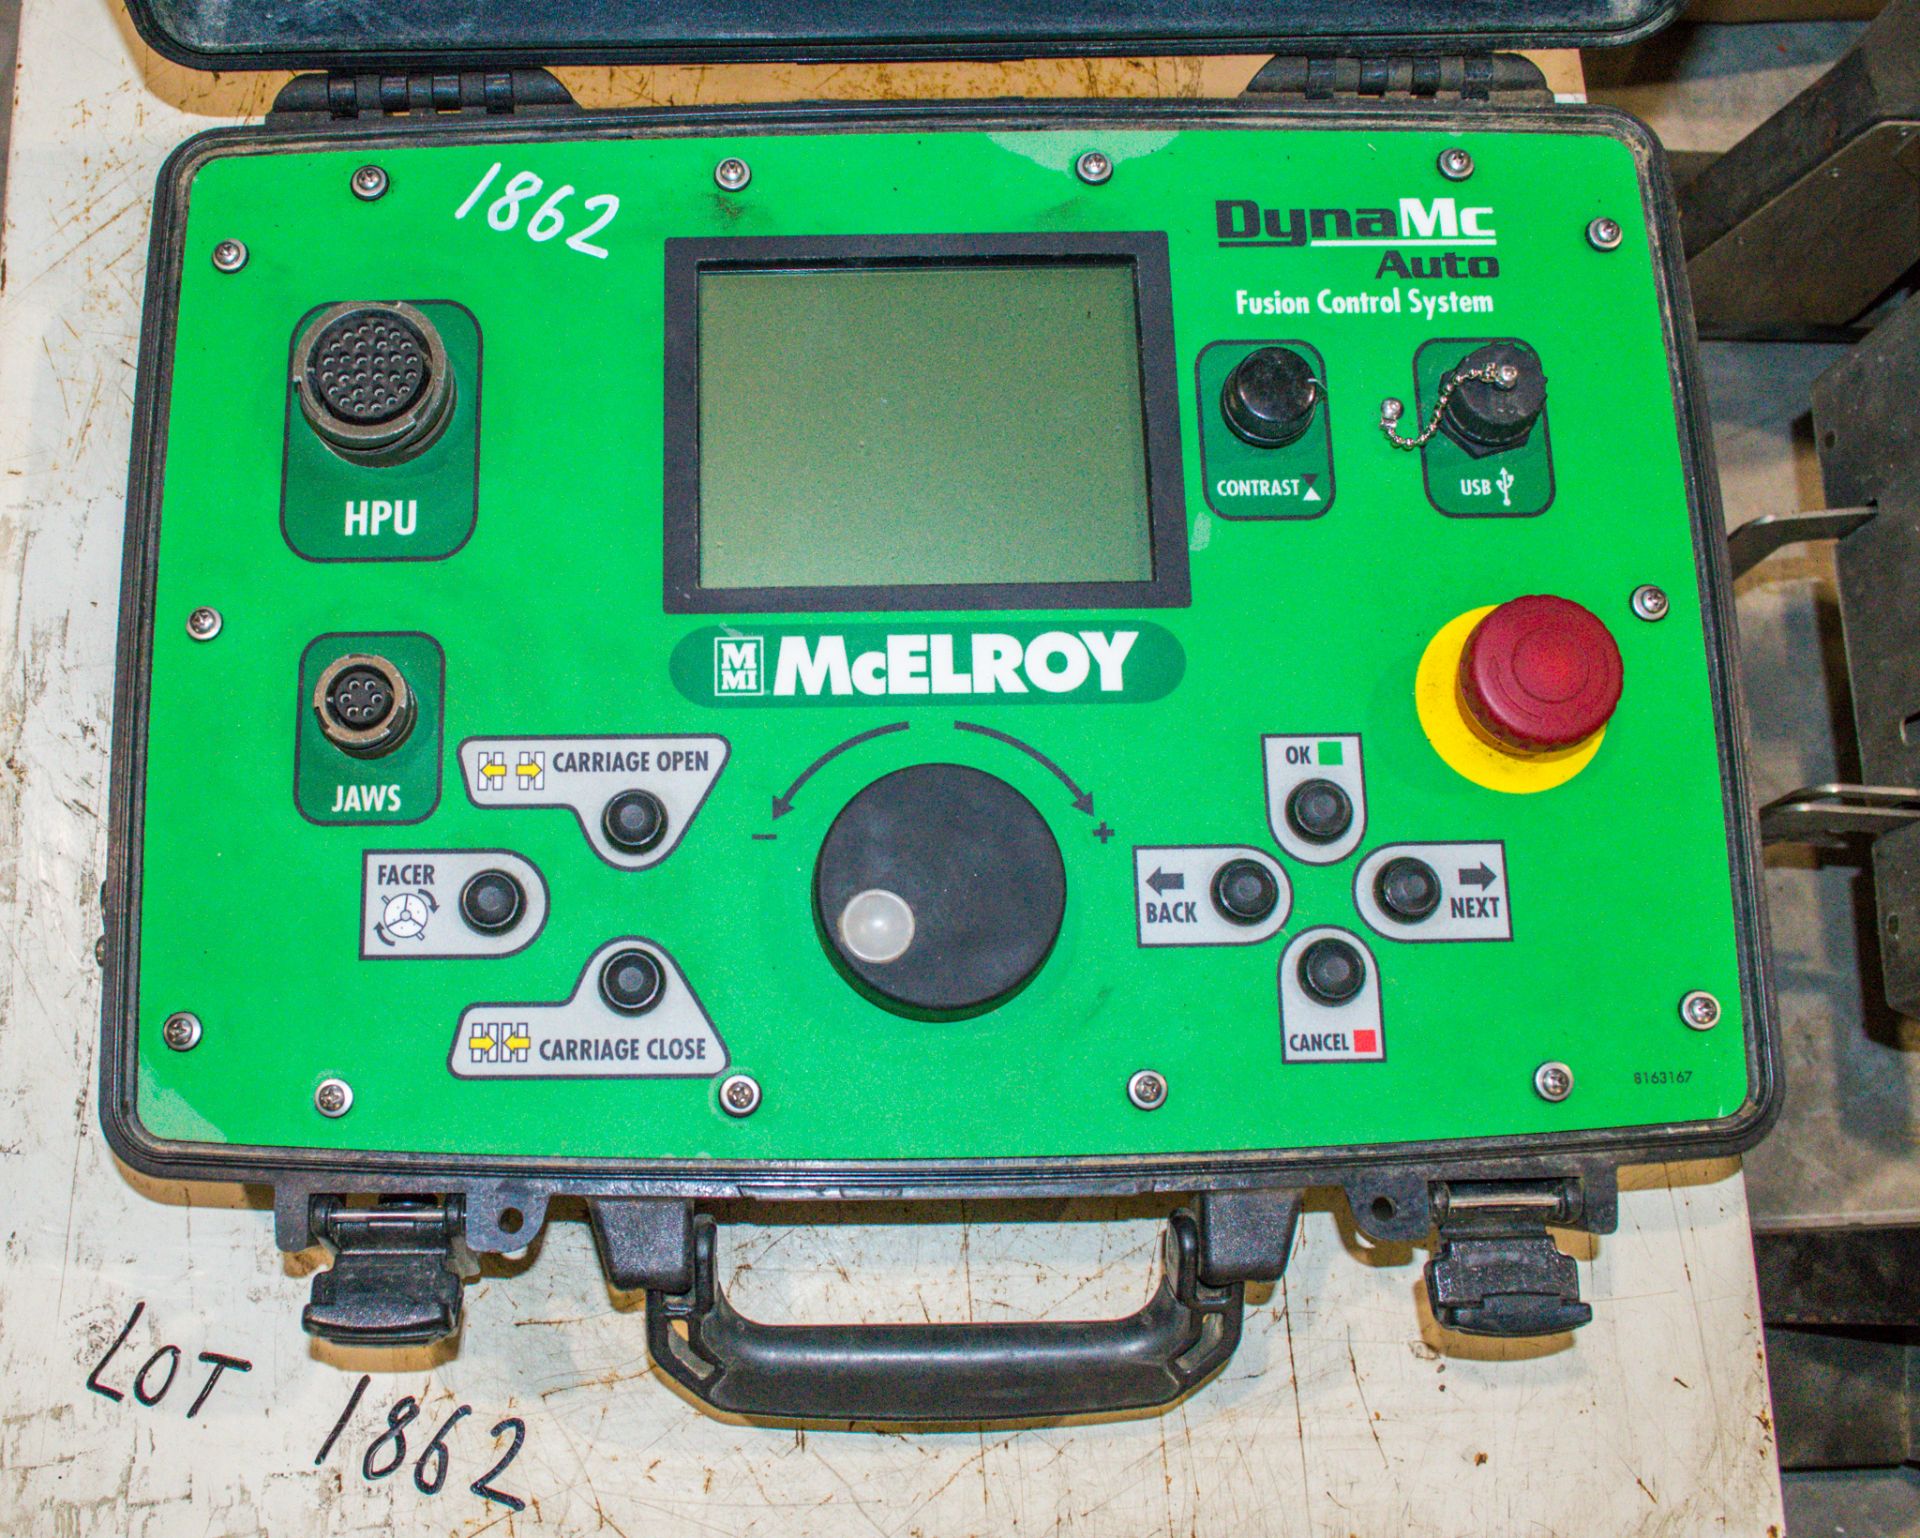 McElroy DynaMc butt fusion welding kit as photographed - Image 3 of 7